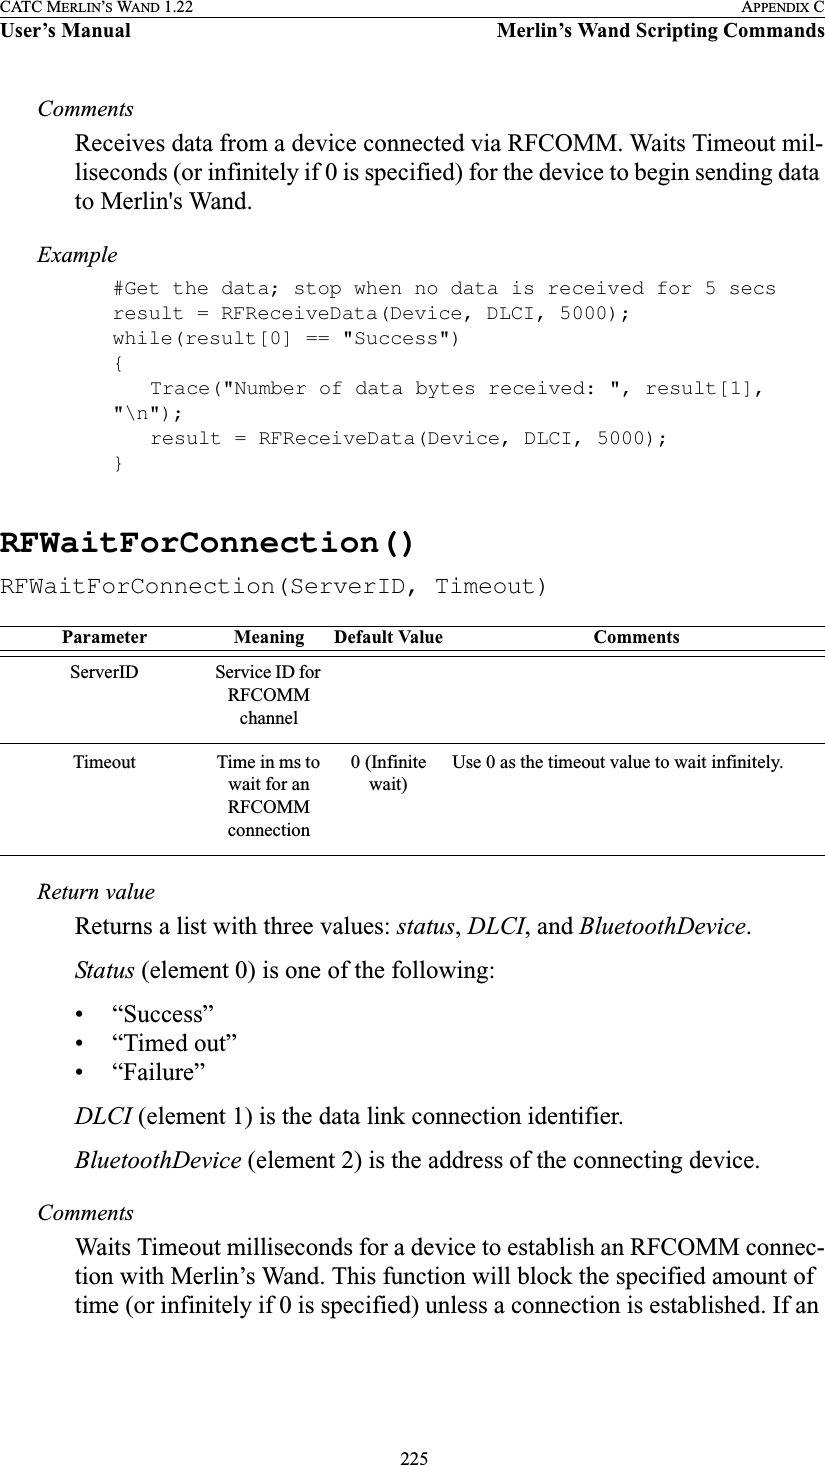  225CATC MERLIN’S WAND 1.22 APPENDIX CUser’s Manual Merlin’s Wand Scripting CommandsCommentsReceives data from a device connected via RFCOMM. Waits Timeout mil-liseconds (or infinitely if 0 is specified) for the device to begin sending data to Merlin&apos;s Wand.Example#Get the data; stop when no data is received for 5 secsresult = RFReceiveData(Device, DLCI, 5000);while(result[0] == &quot;Success&quot;){Trace(&quot;Number of data bytes received: &quot;, result[1], &quot;\n&quot;);result = RFReceiveData(Device, DLCI, 5000);}RFWaitForConnection()RFWaitForConnection(ServerID, Timeout)Return valueReturns a list with three values: status, DLCI, and BluetoothDevice.Status (element 0) is one of the following:• “Success”• “Timed out”• “Failure”DLCI (element 1) is the data link connection identifier.BluetoothDevice (element 2) is the address of the connecting device.CommentsWaits Timeout milliseconds for a device to establish an RFCOMM connec-tion with Merlin’s Wand. This function will block the specified amount of time (or infinitely if 0 is specified) unless a connection is established. If an Parameter Meaning Default Value CommentsServerID Service ID for RFCOMM channelTimeout Time in ms to wait for an RFCOMM connection0 (Infinite wait)Use 0 as the timeout value to wait infinitely.